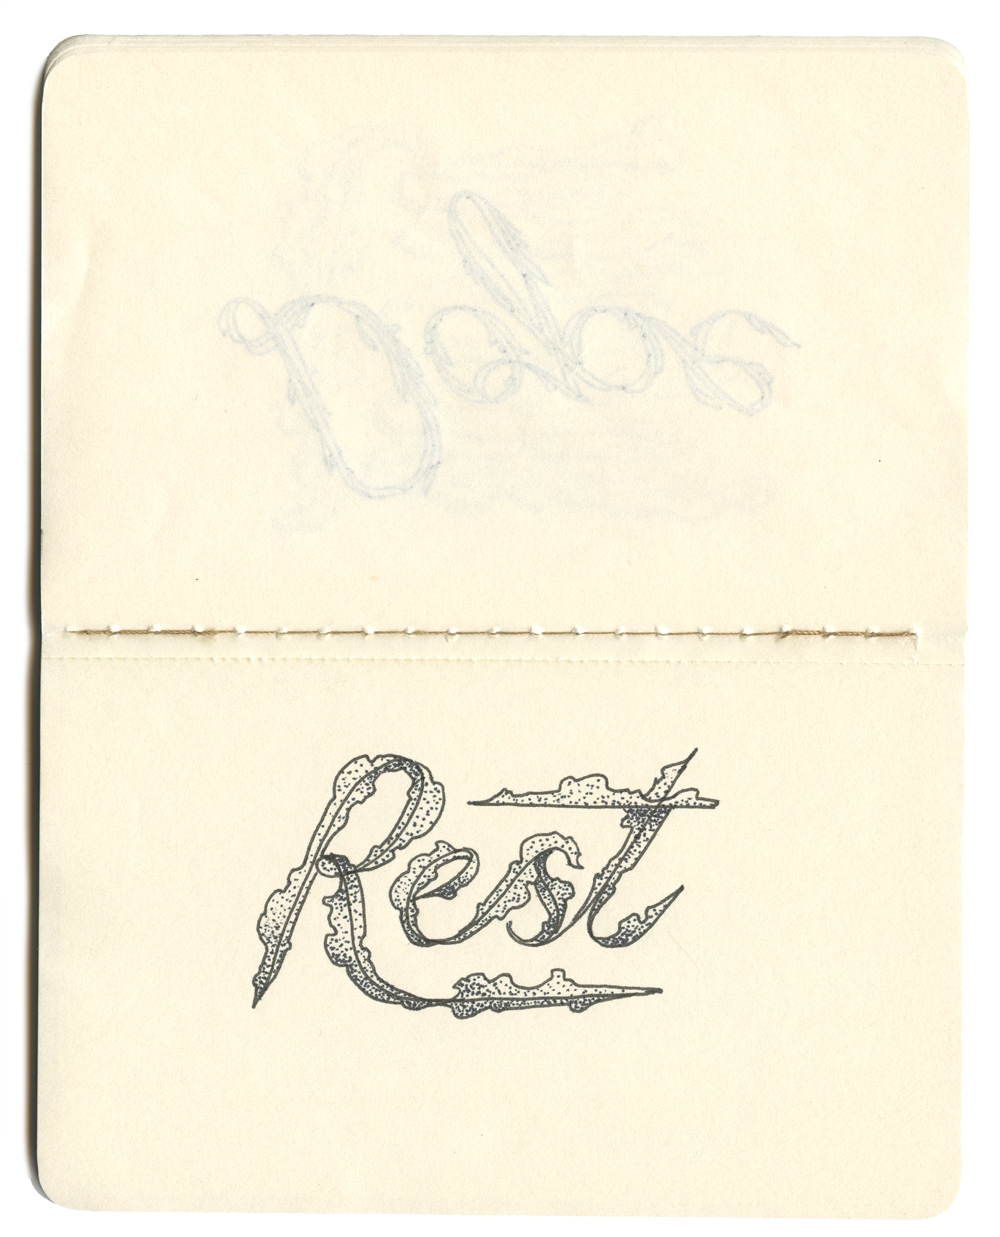 "Rest." Hand-drawn lettering by Laura Dreyer.